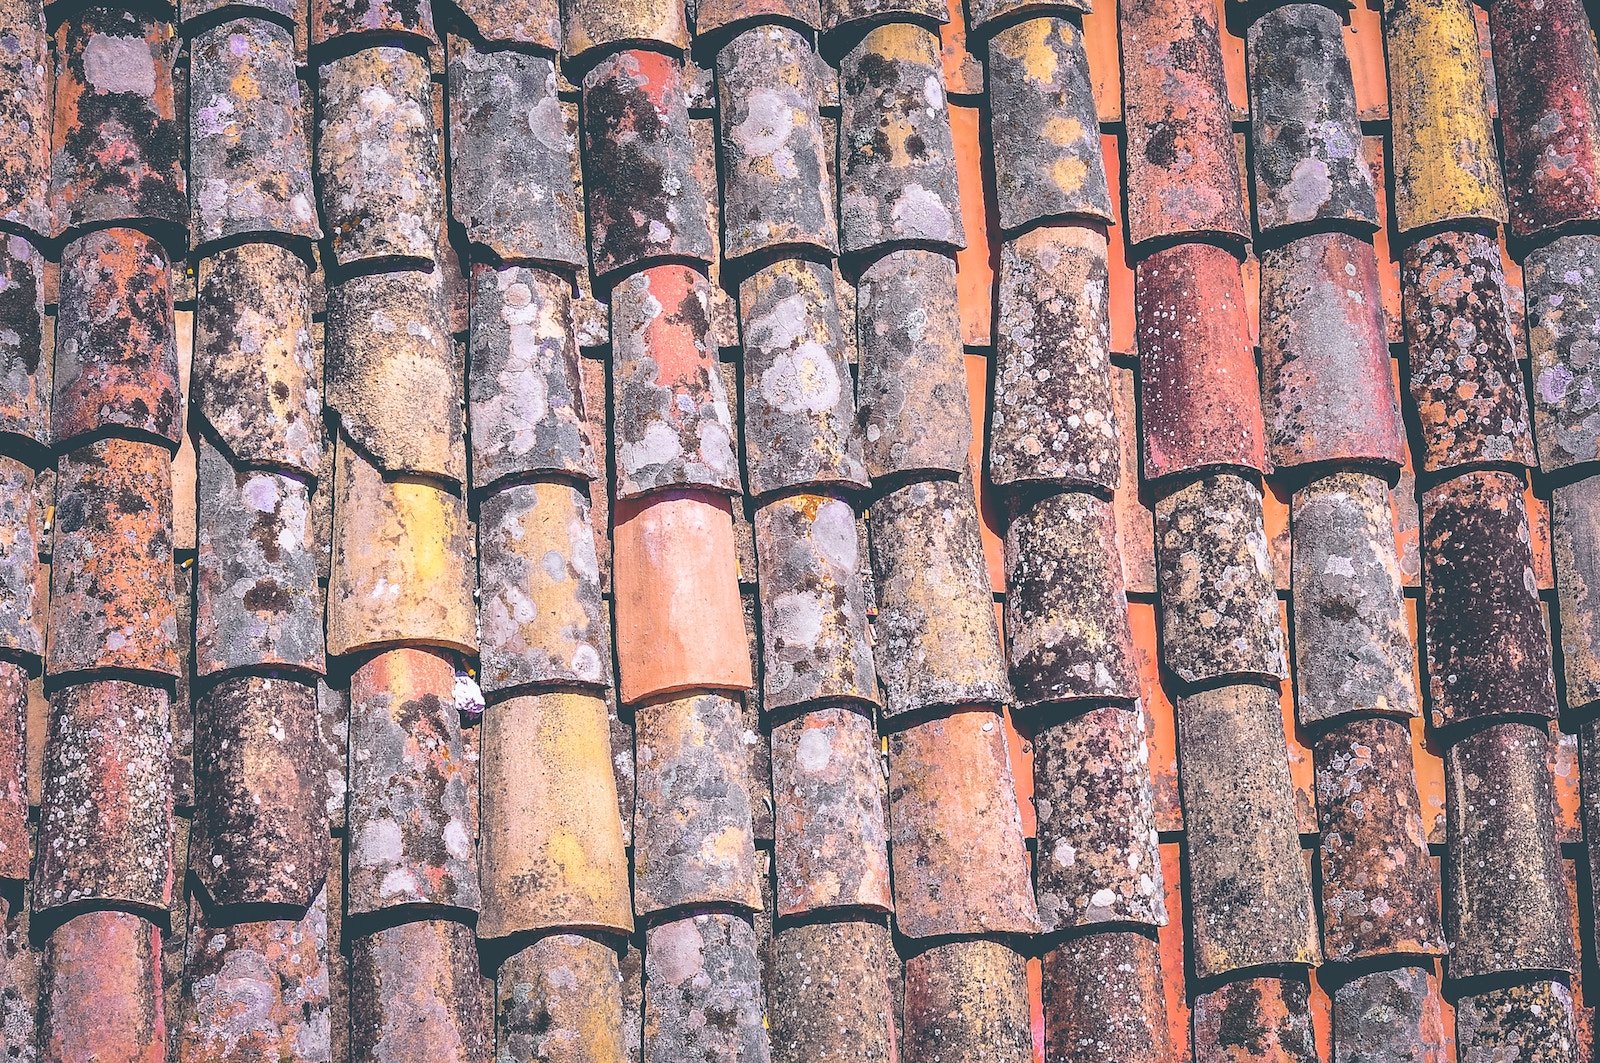 Roof maintenance checklist: are there missing or damaged shingles?